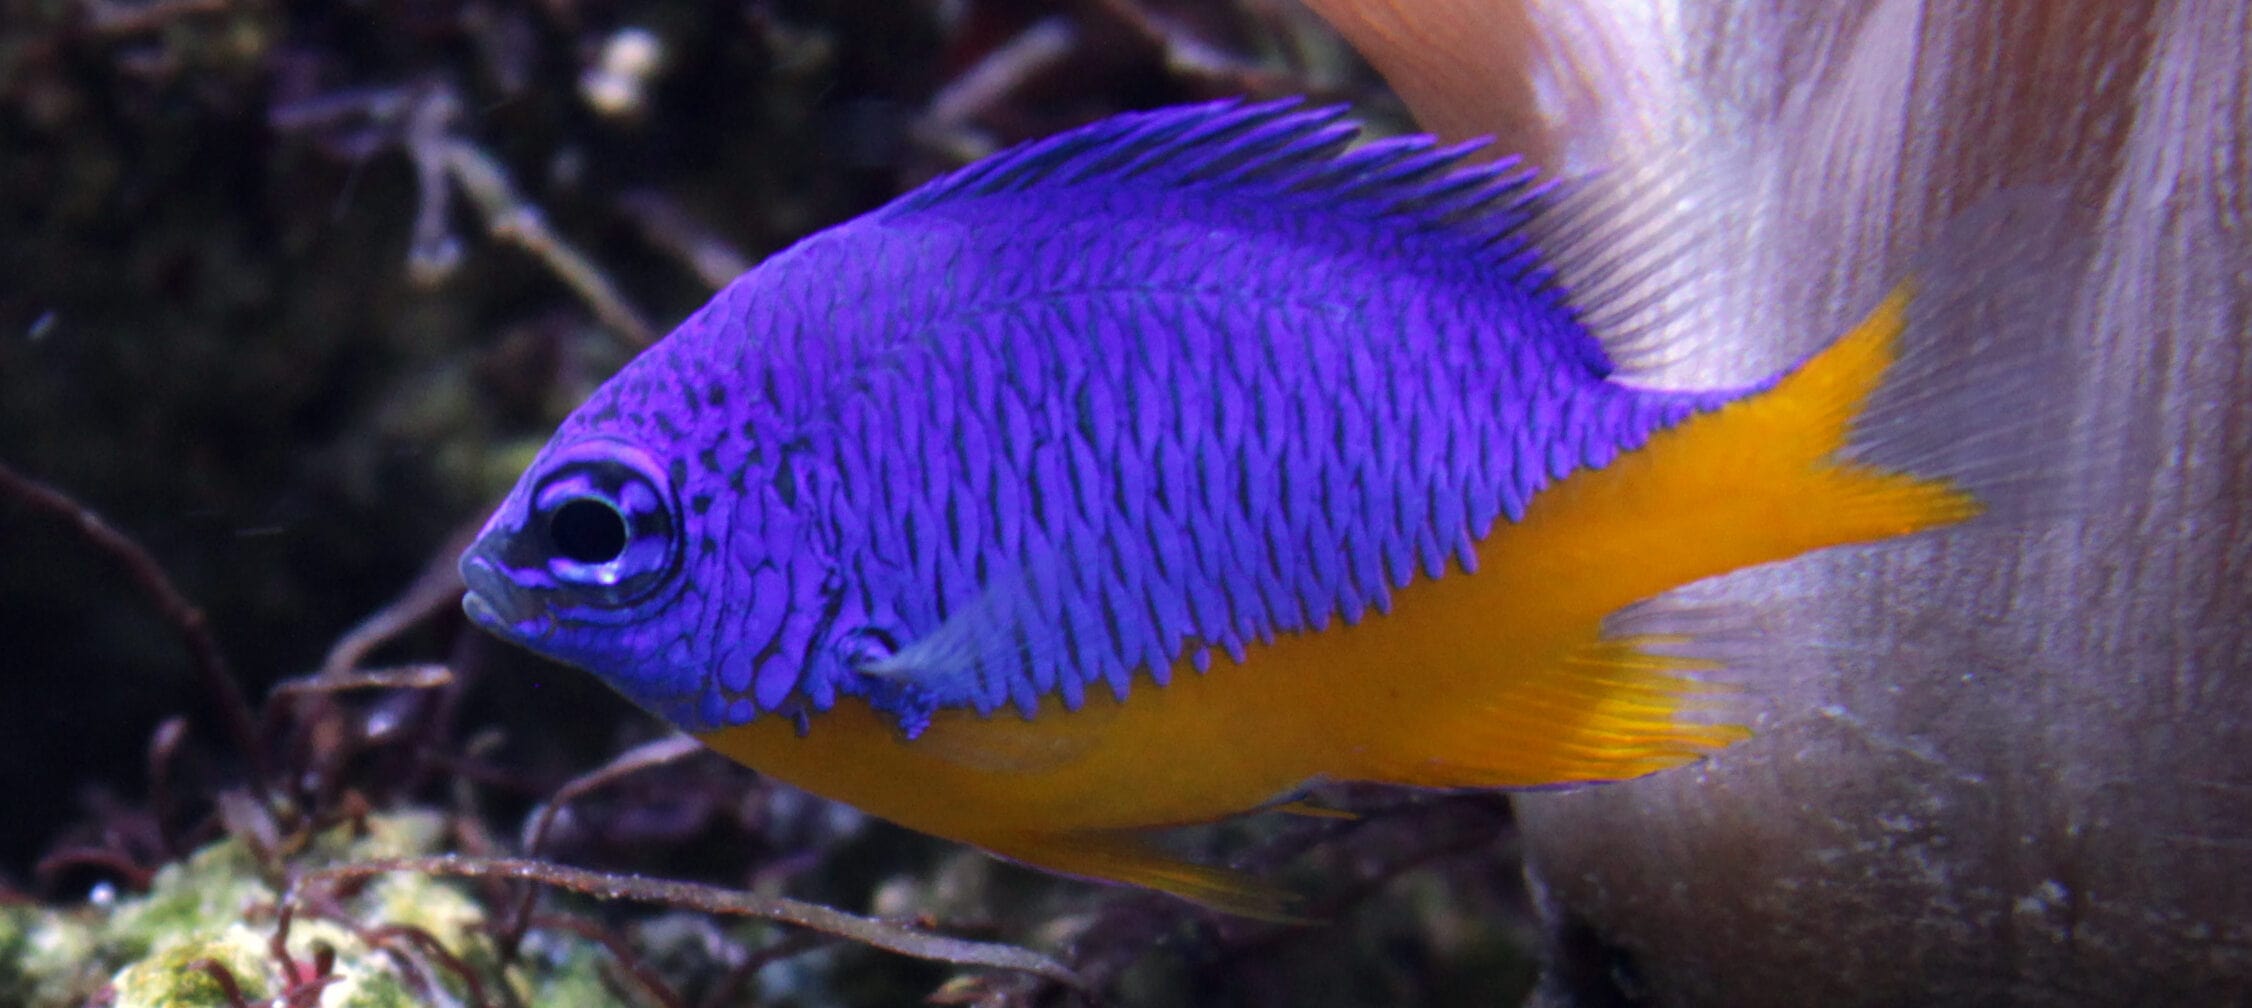 19-facts-about-damselfish